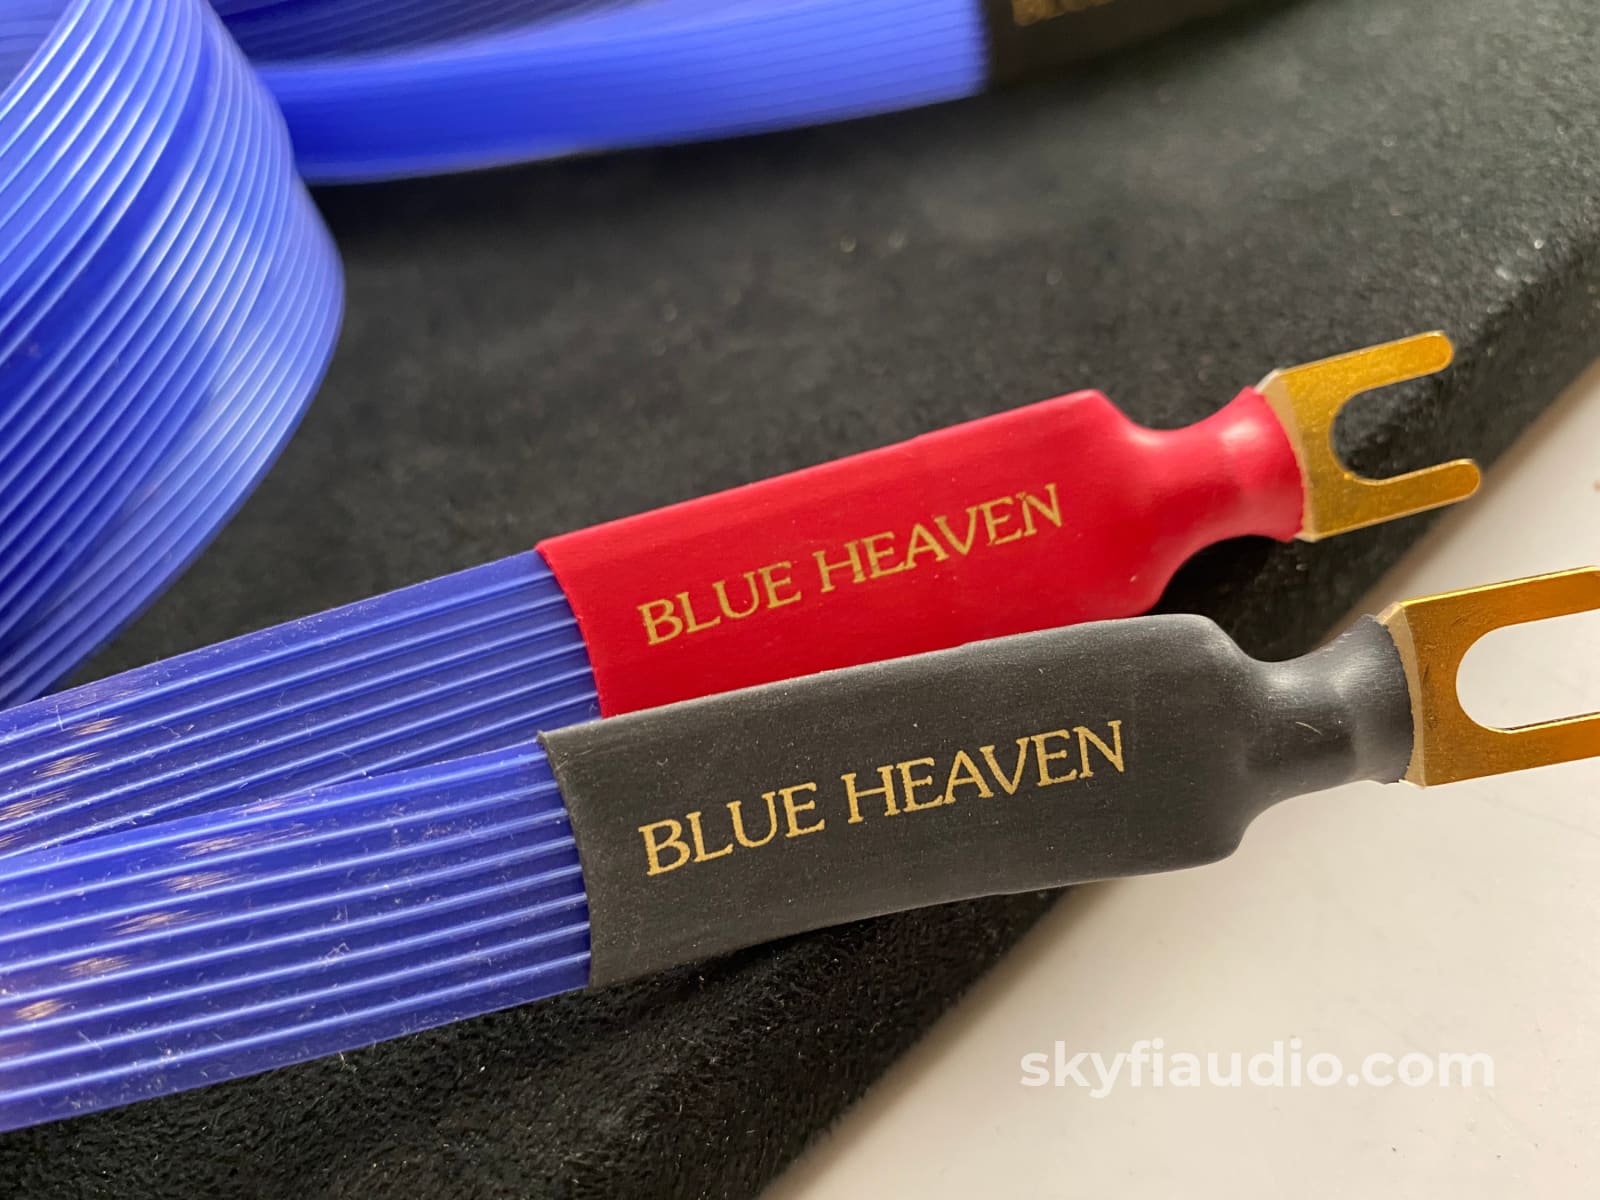 Nordost Blue Heaven Speaker Cable Pair - 6M Cables